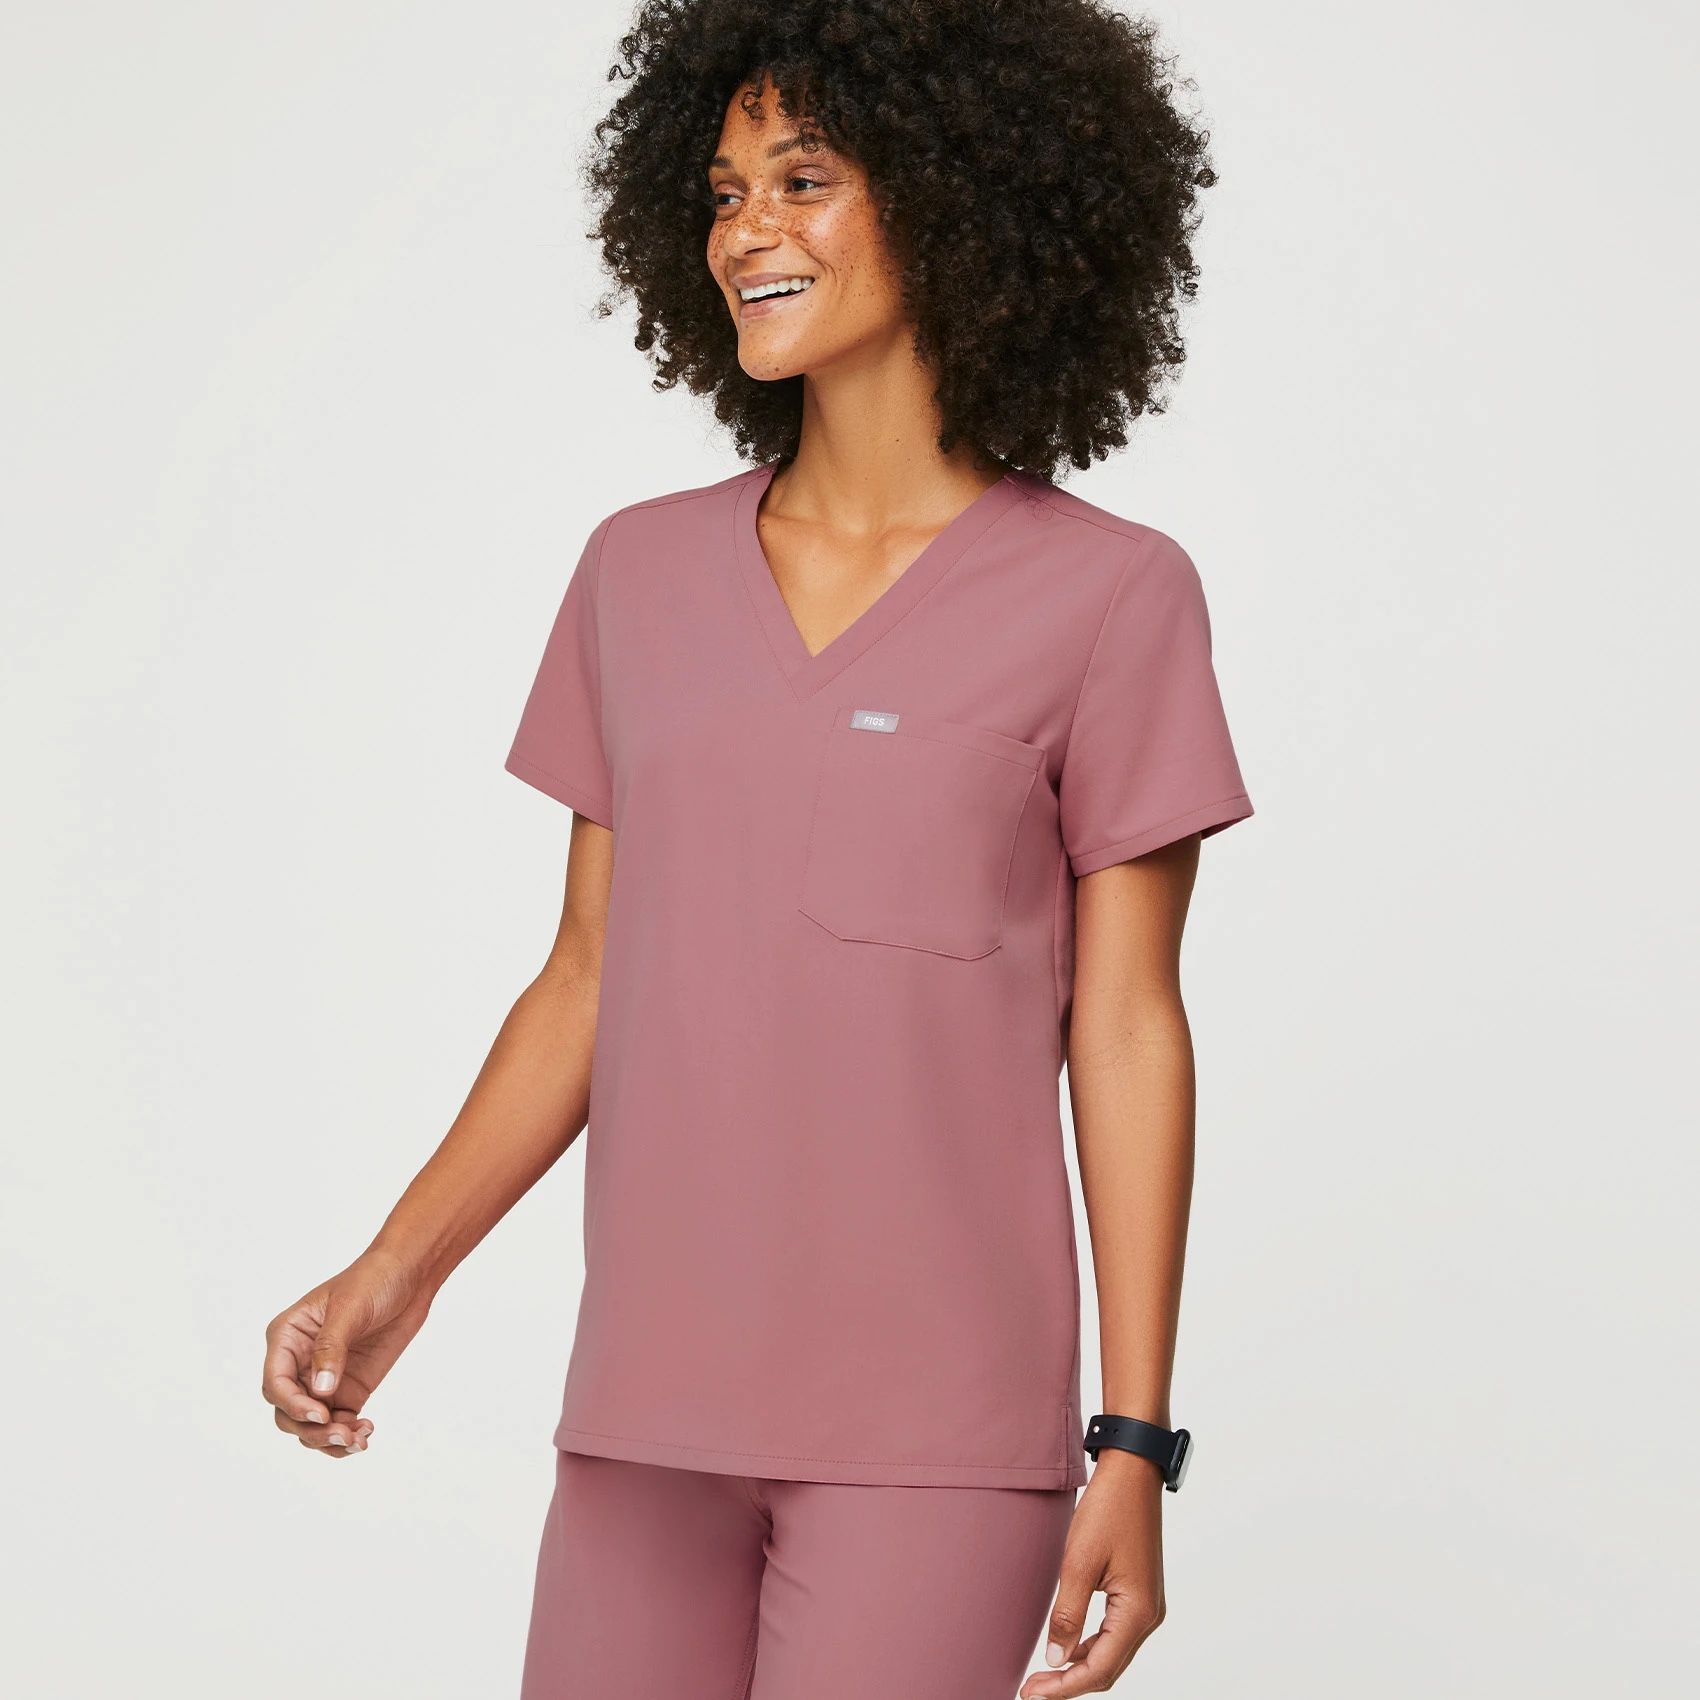 FIGS SCRUBS SET IN MAUVE (BRAND NEW/NEVER USED)